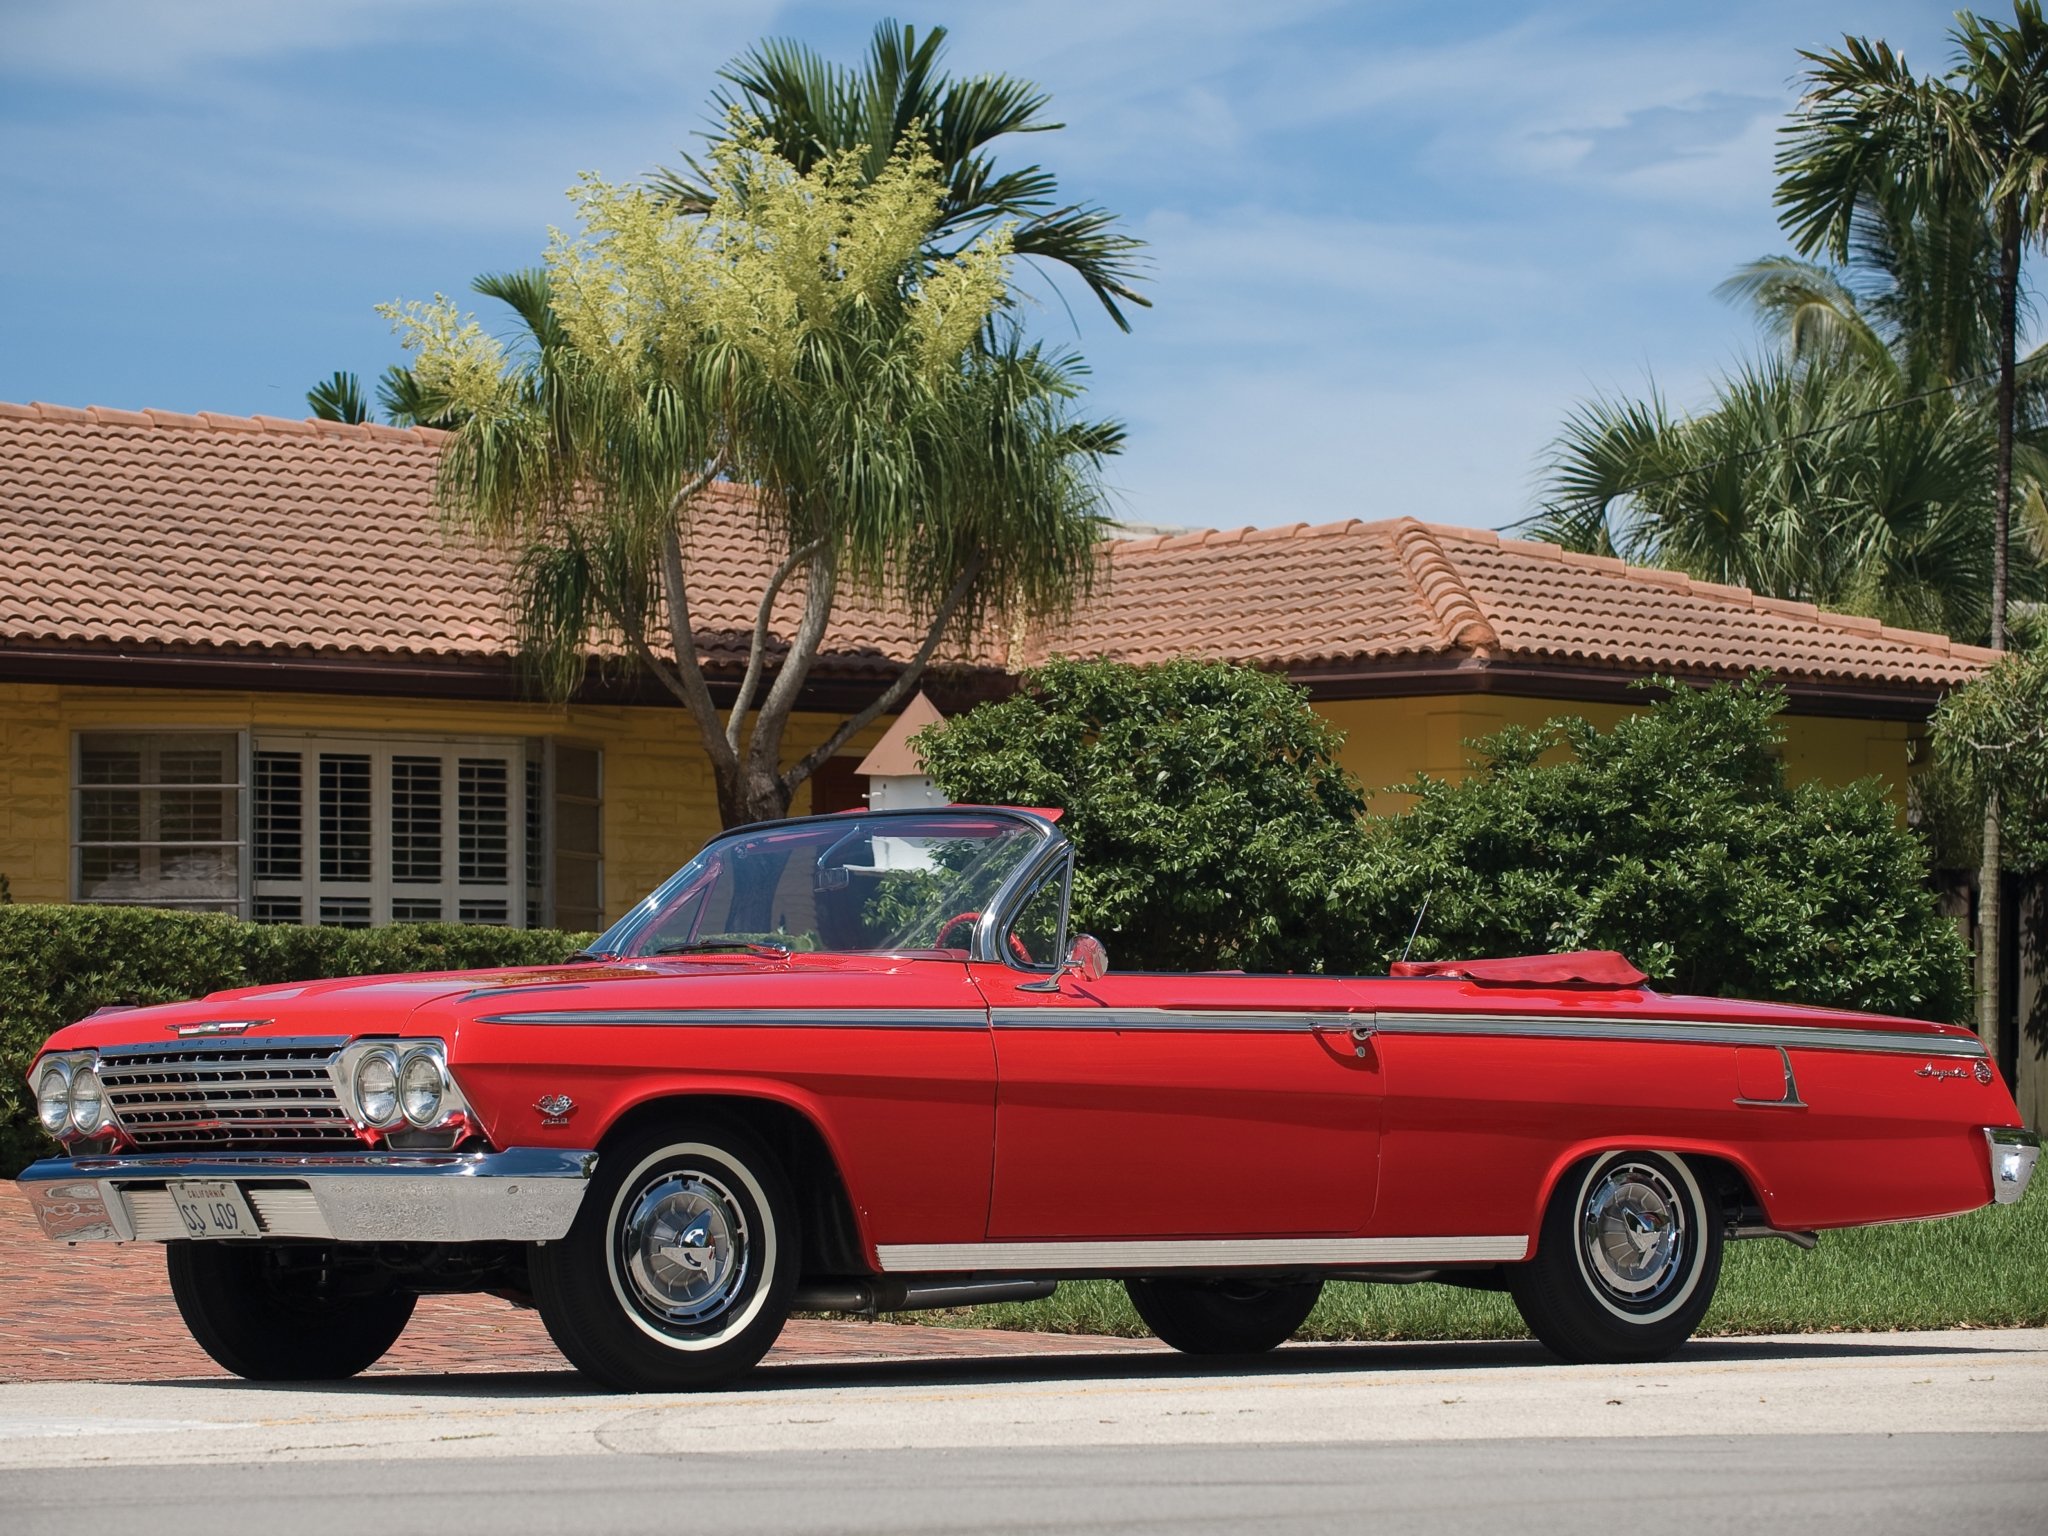 1962, Chevrolet, Impala, S s, 409, Convertible, Muscle, Classic Wallpaper